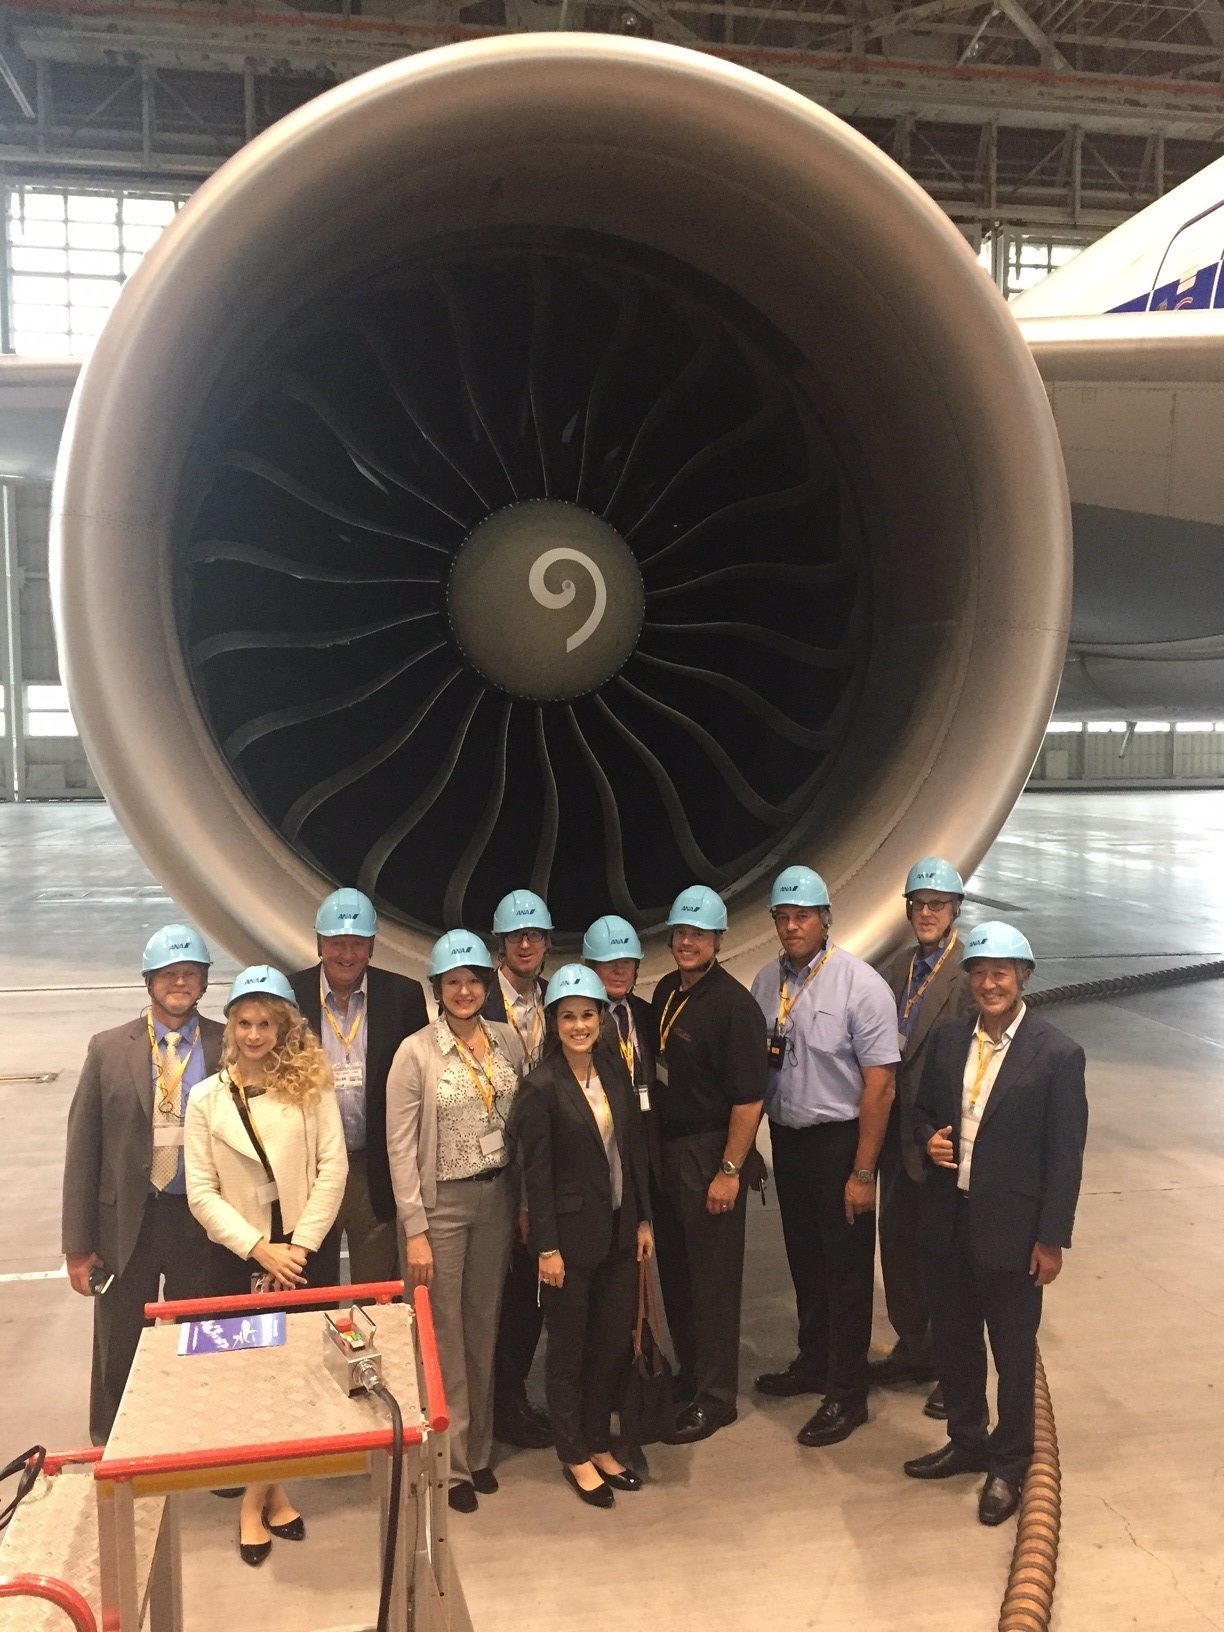 NEWS RELEASE: Commerce leads state trade delegation to Tokyo for Japan International Aerospace Exhibition, Oct. 12-15